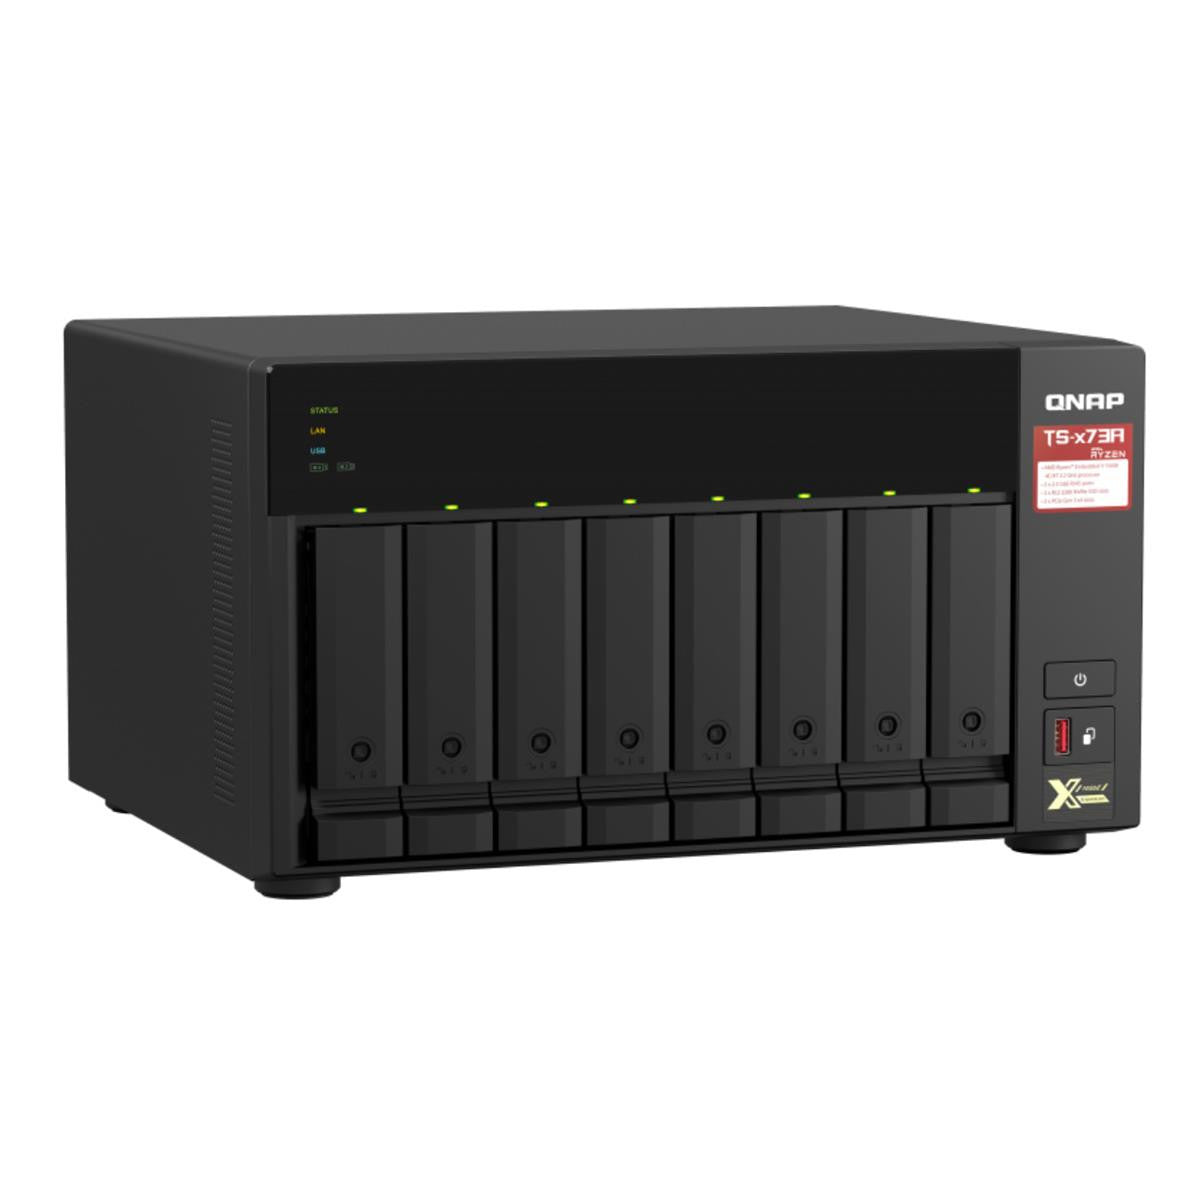 QNAP TS-873A 8-BAY NAS with 32GB DDR4 RAM and 64TB (8x8TB) Western Digital RED PLUS Drives Fully Assembled and Tested